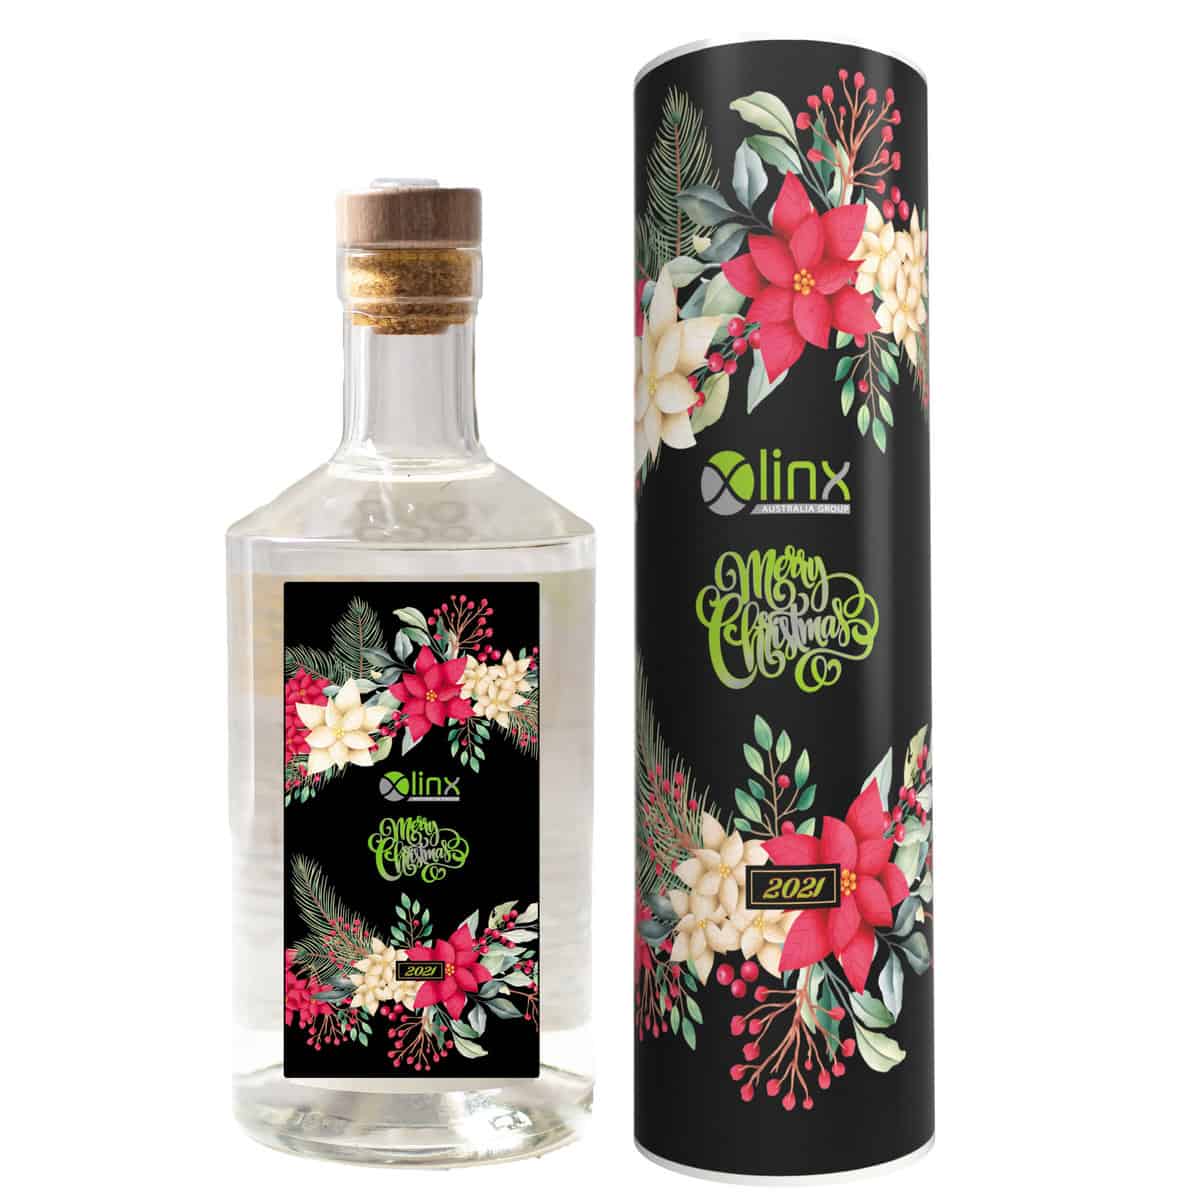 Custom Labelled Gin Is Now Available! 1